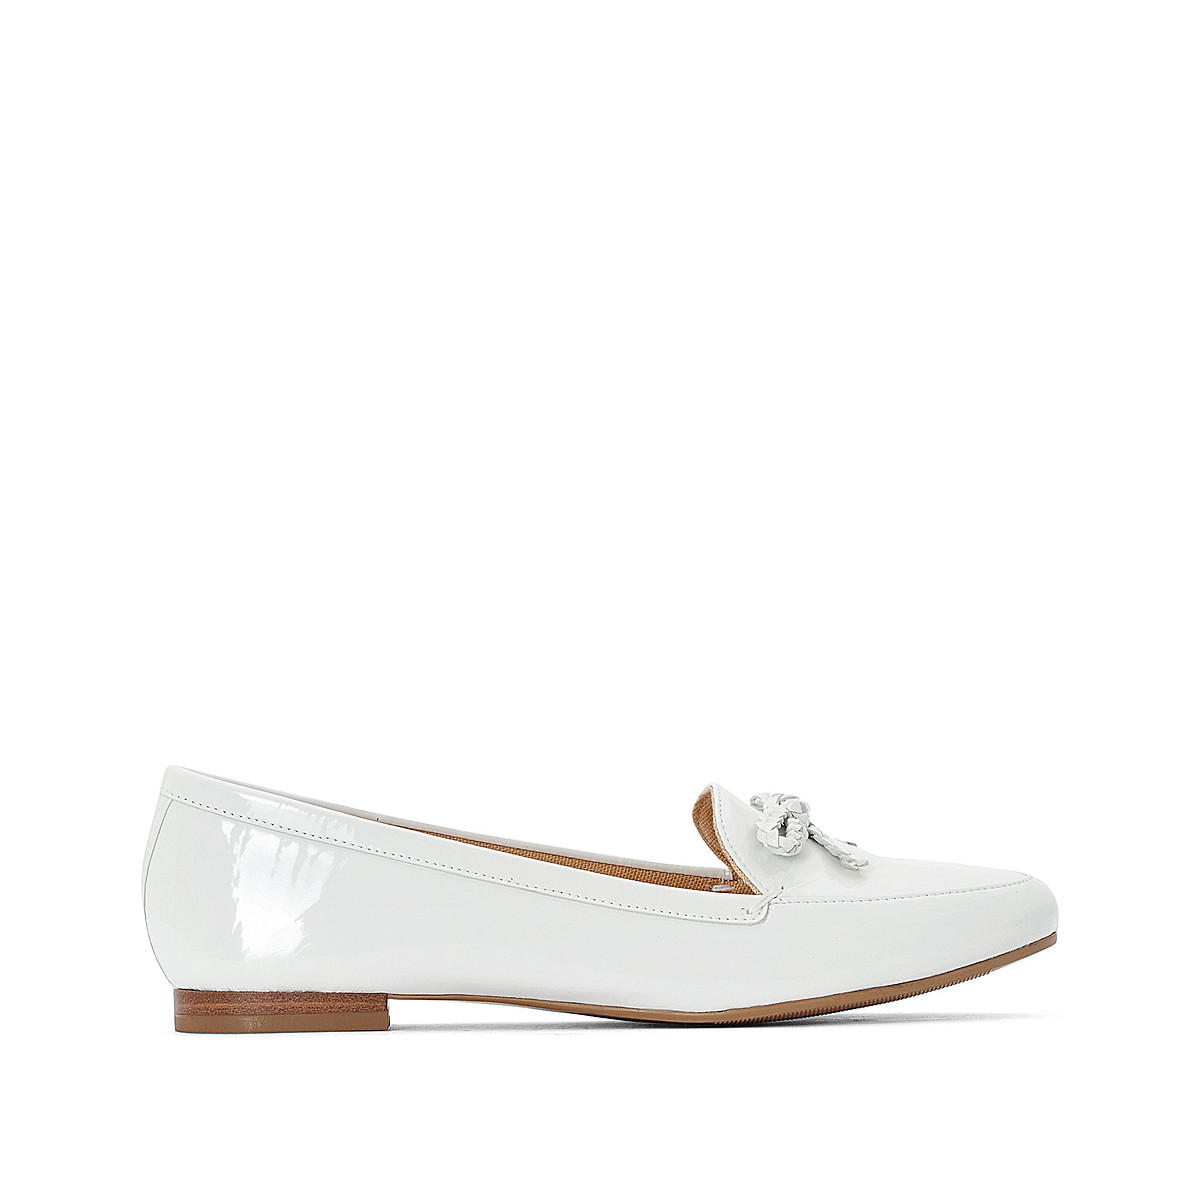 Patent leather loafers , white, Anne Weyburn | La Redoute